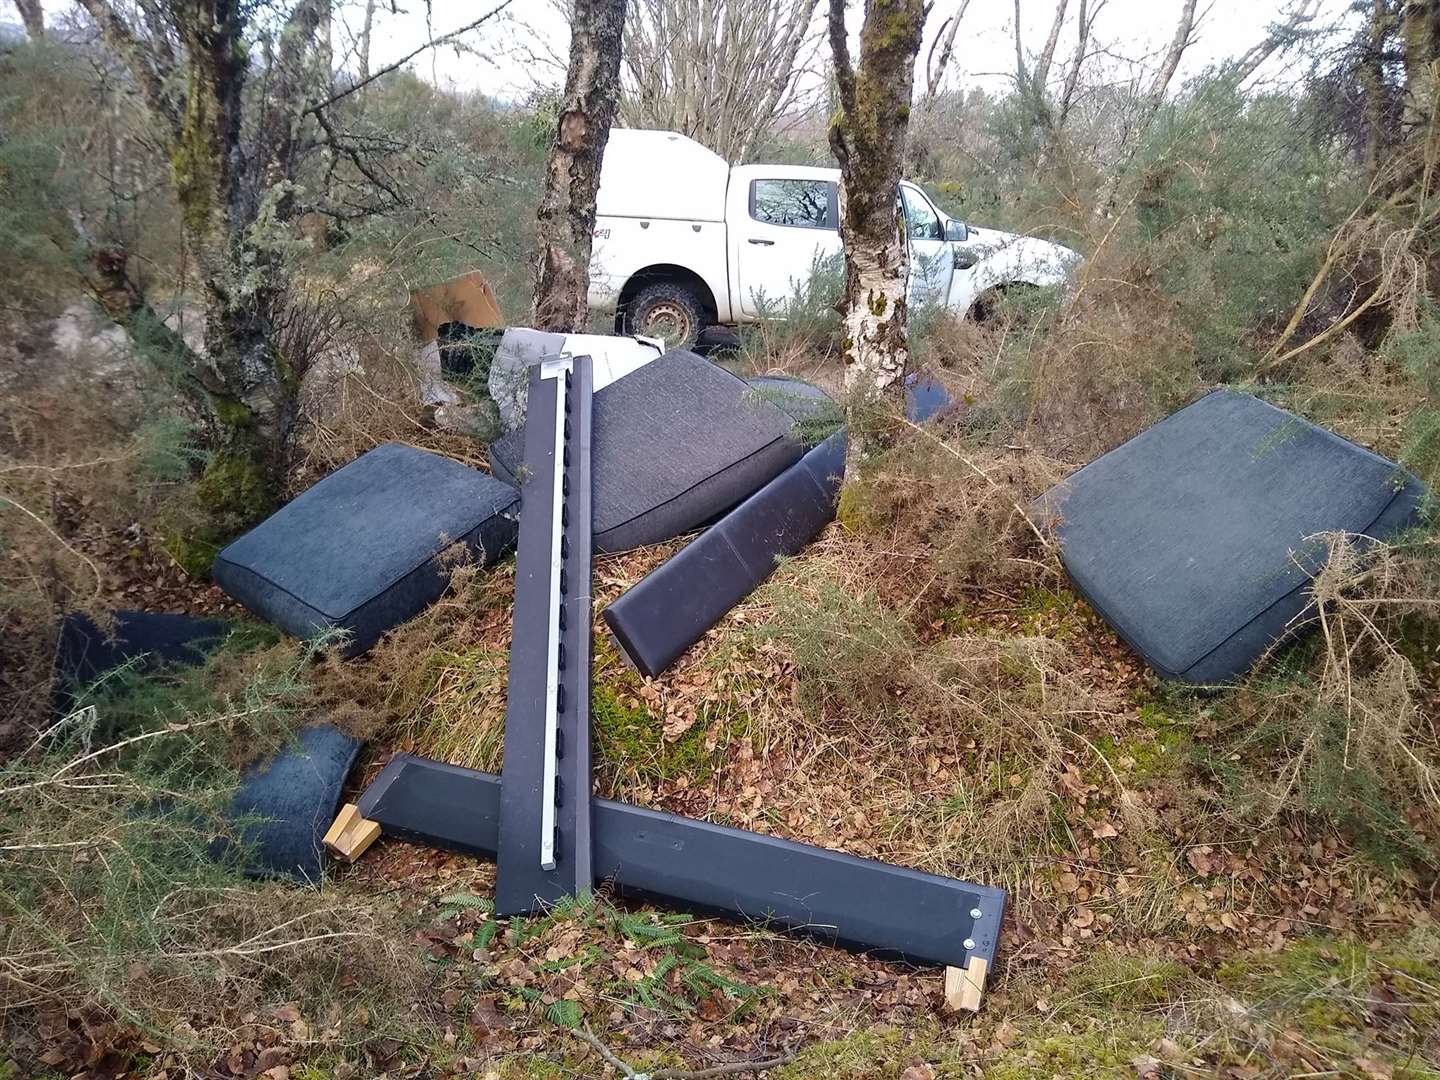 Bed frames and other furniture have been thrown into the forest.